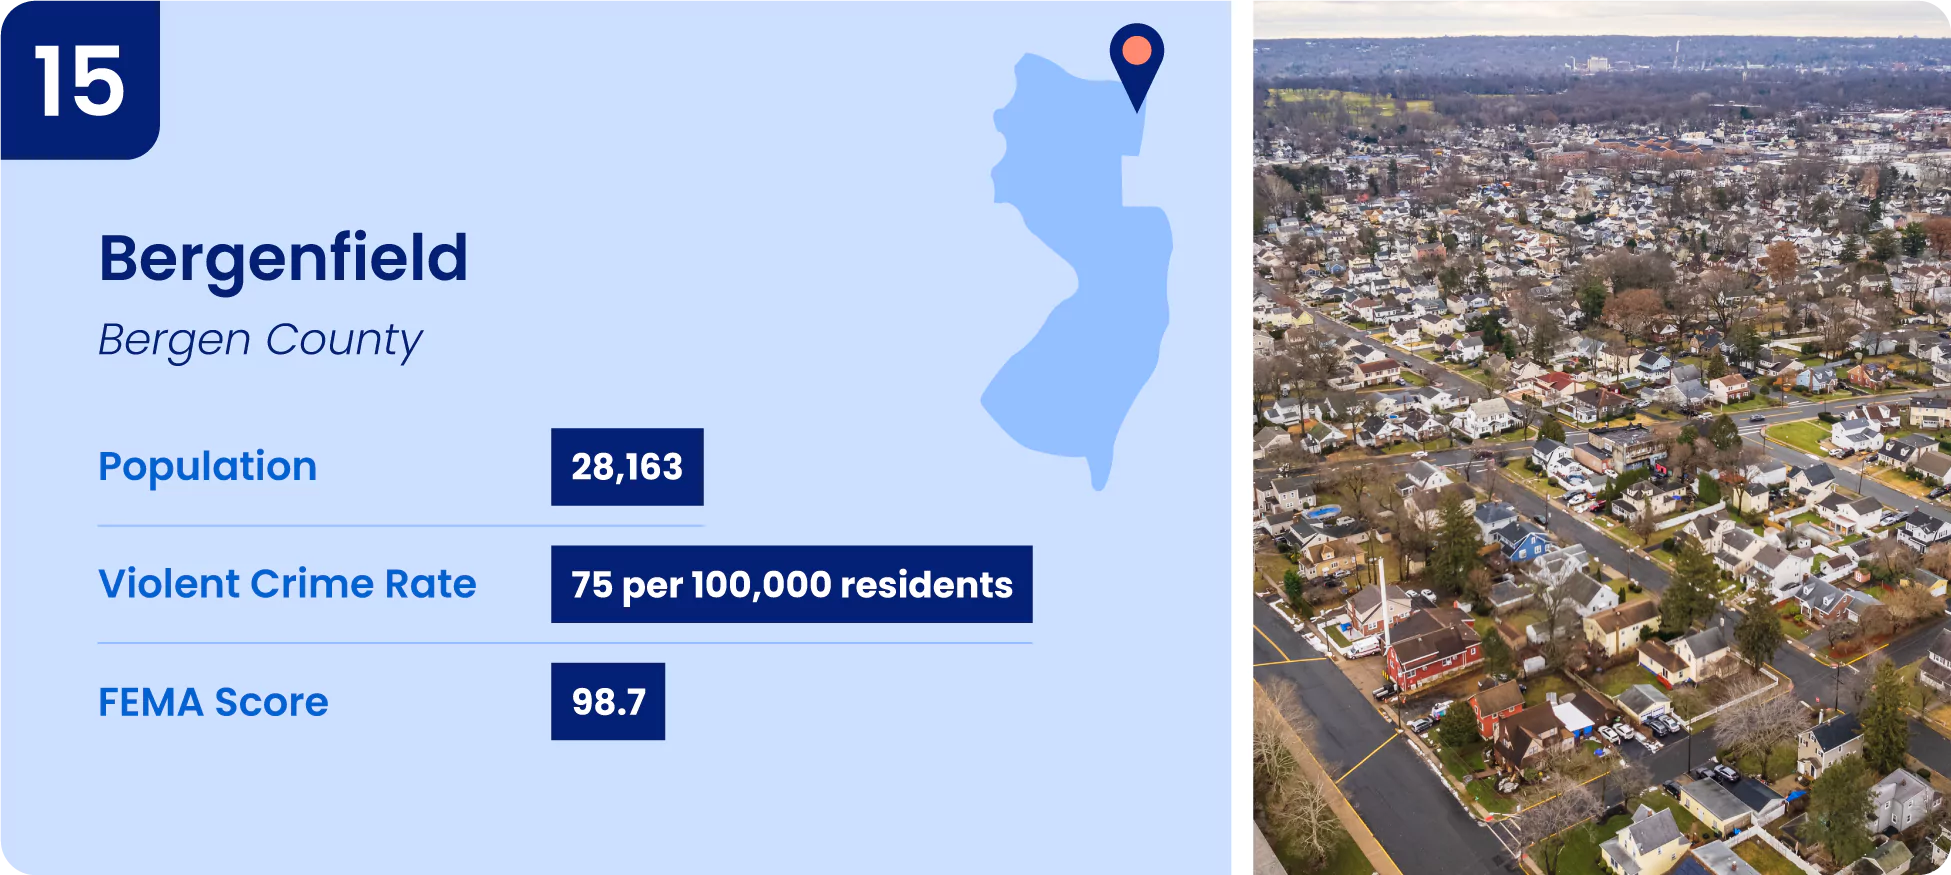 Image shows key information for one of the safest cities in New Jersey, Bergenfield.